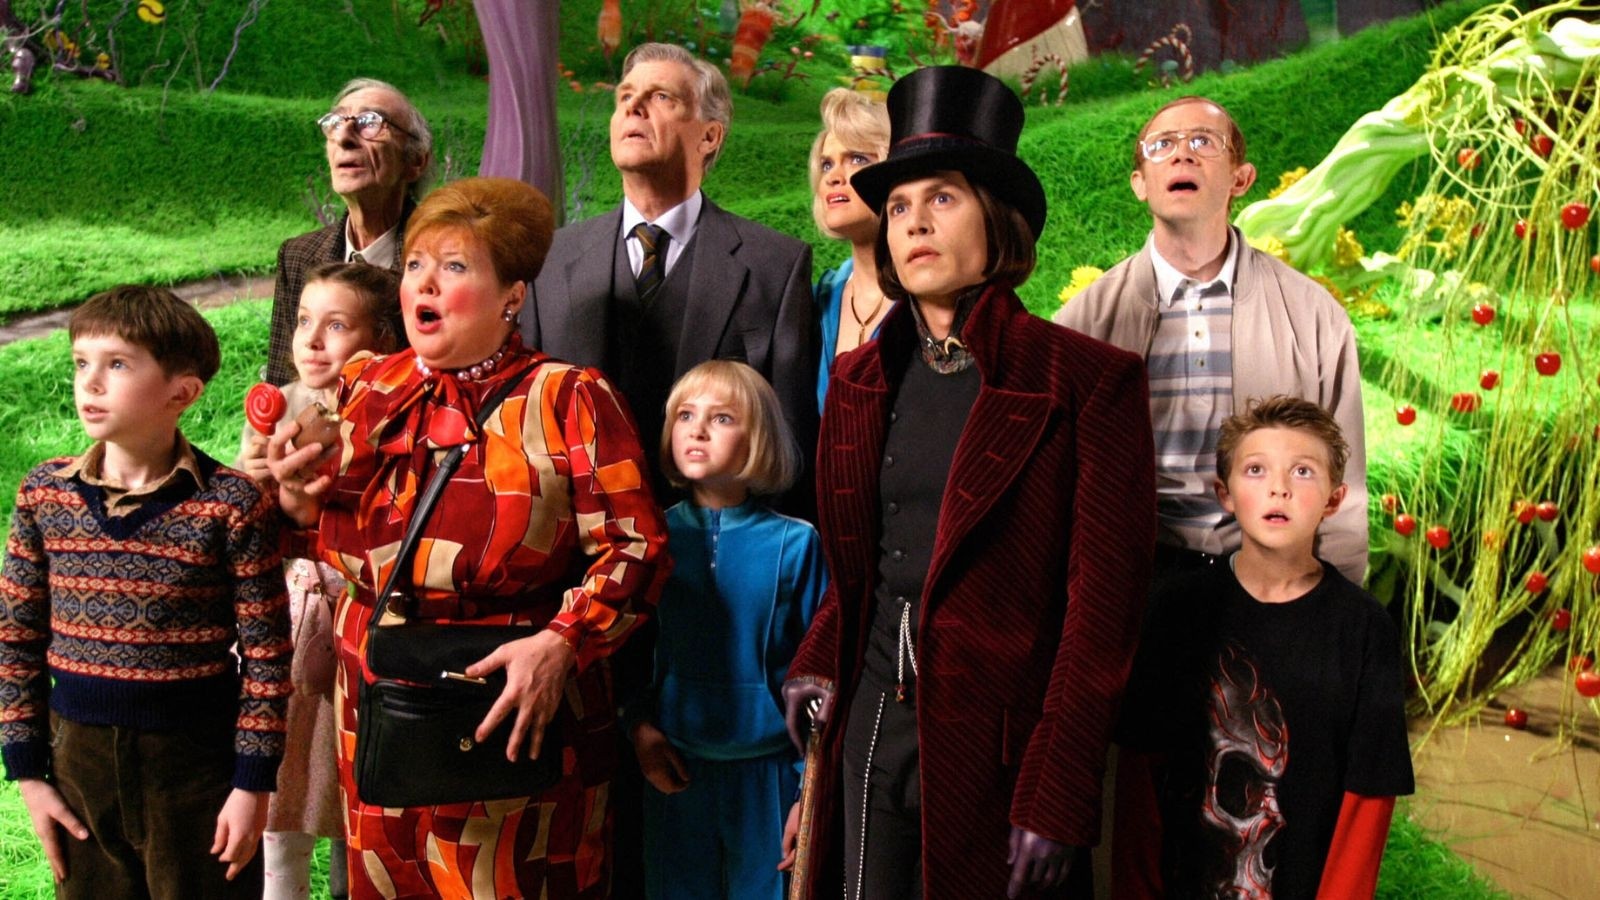 Charlie And The Chocolate Factory (2005)